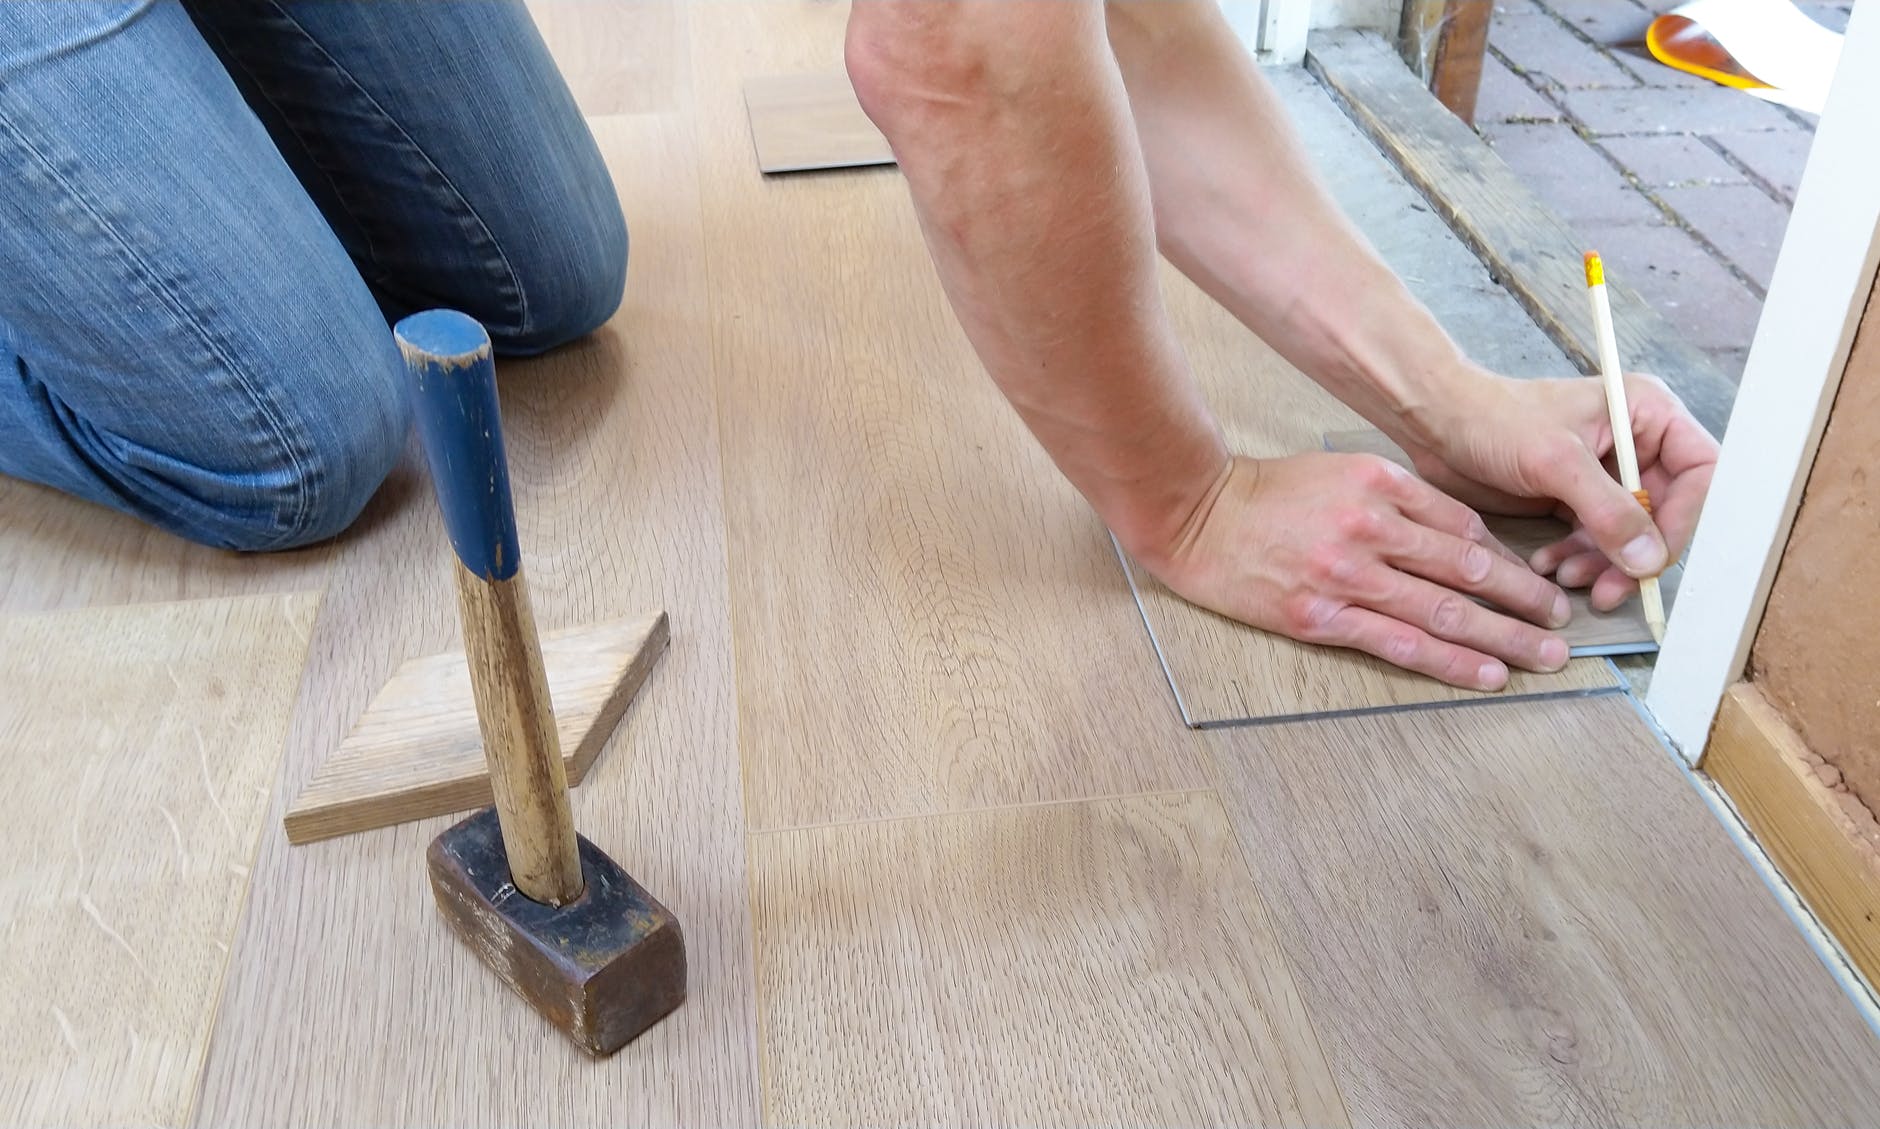 How to Pick Flooring That Inspires Learning